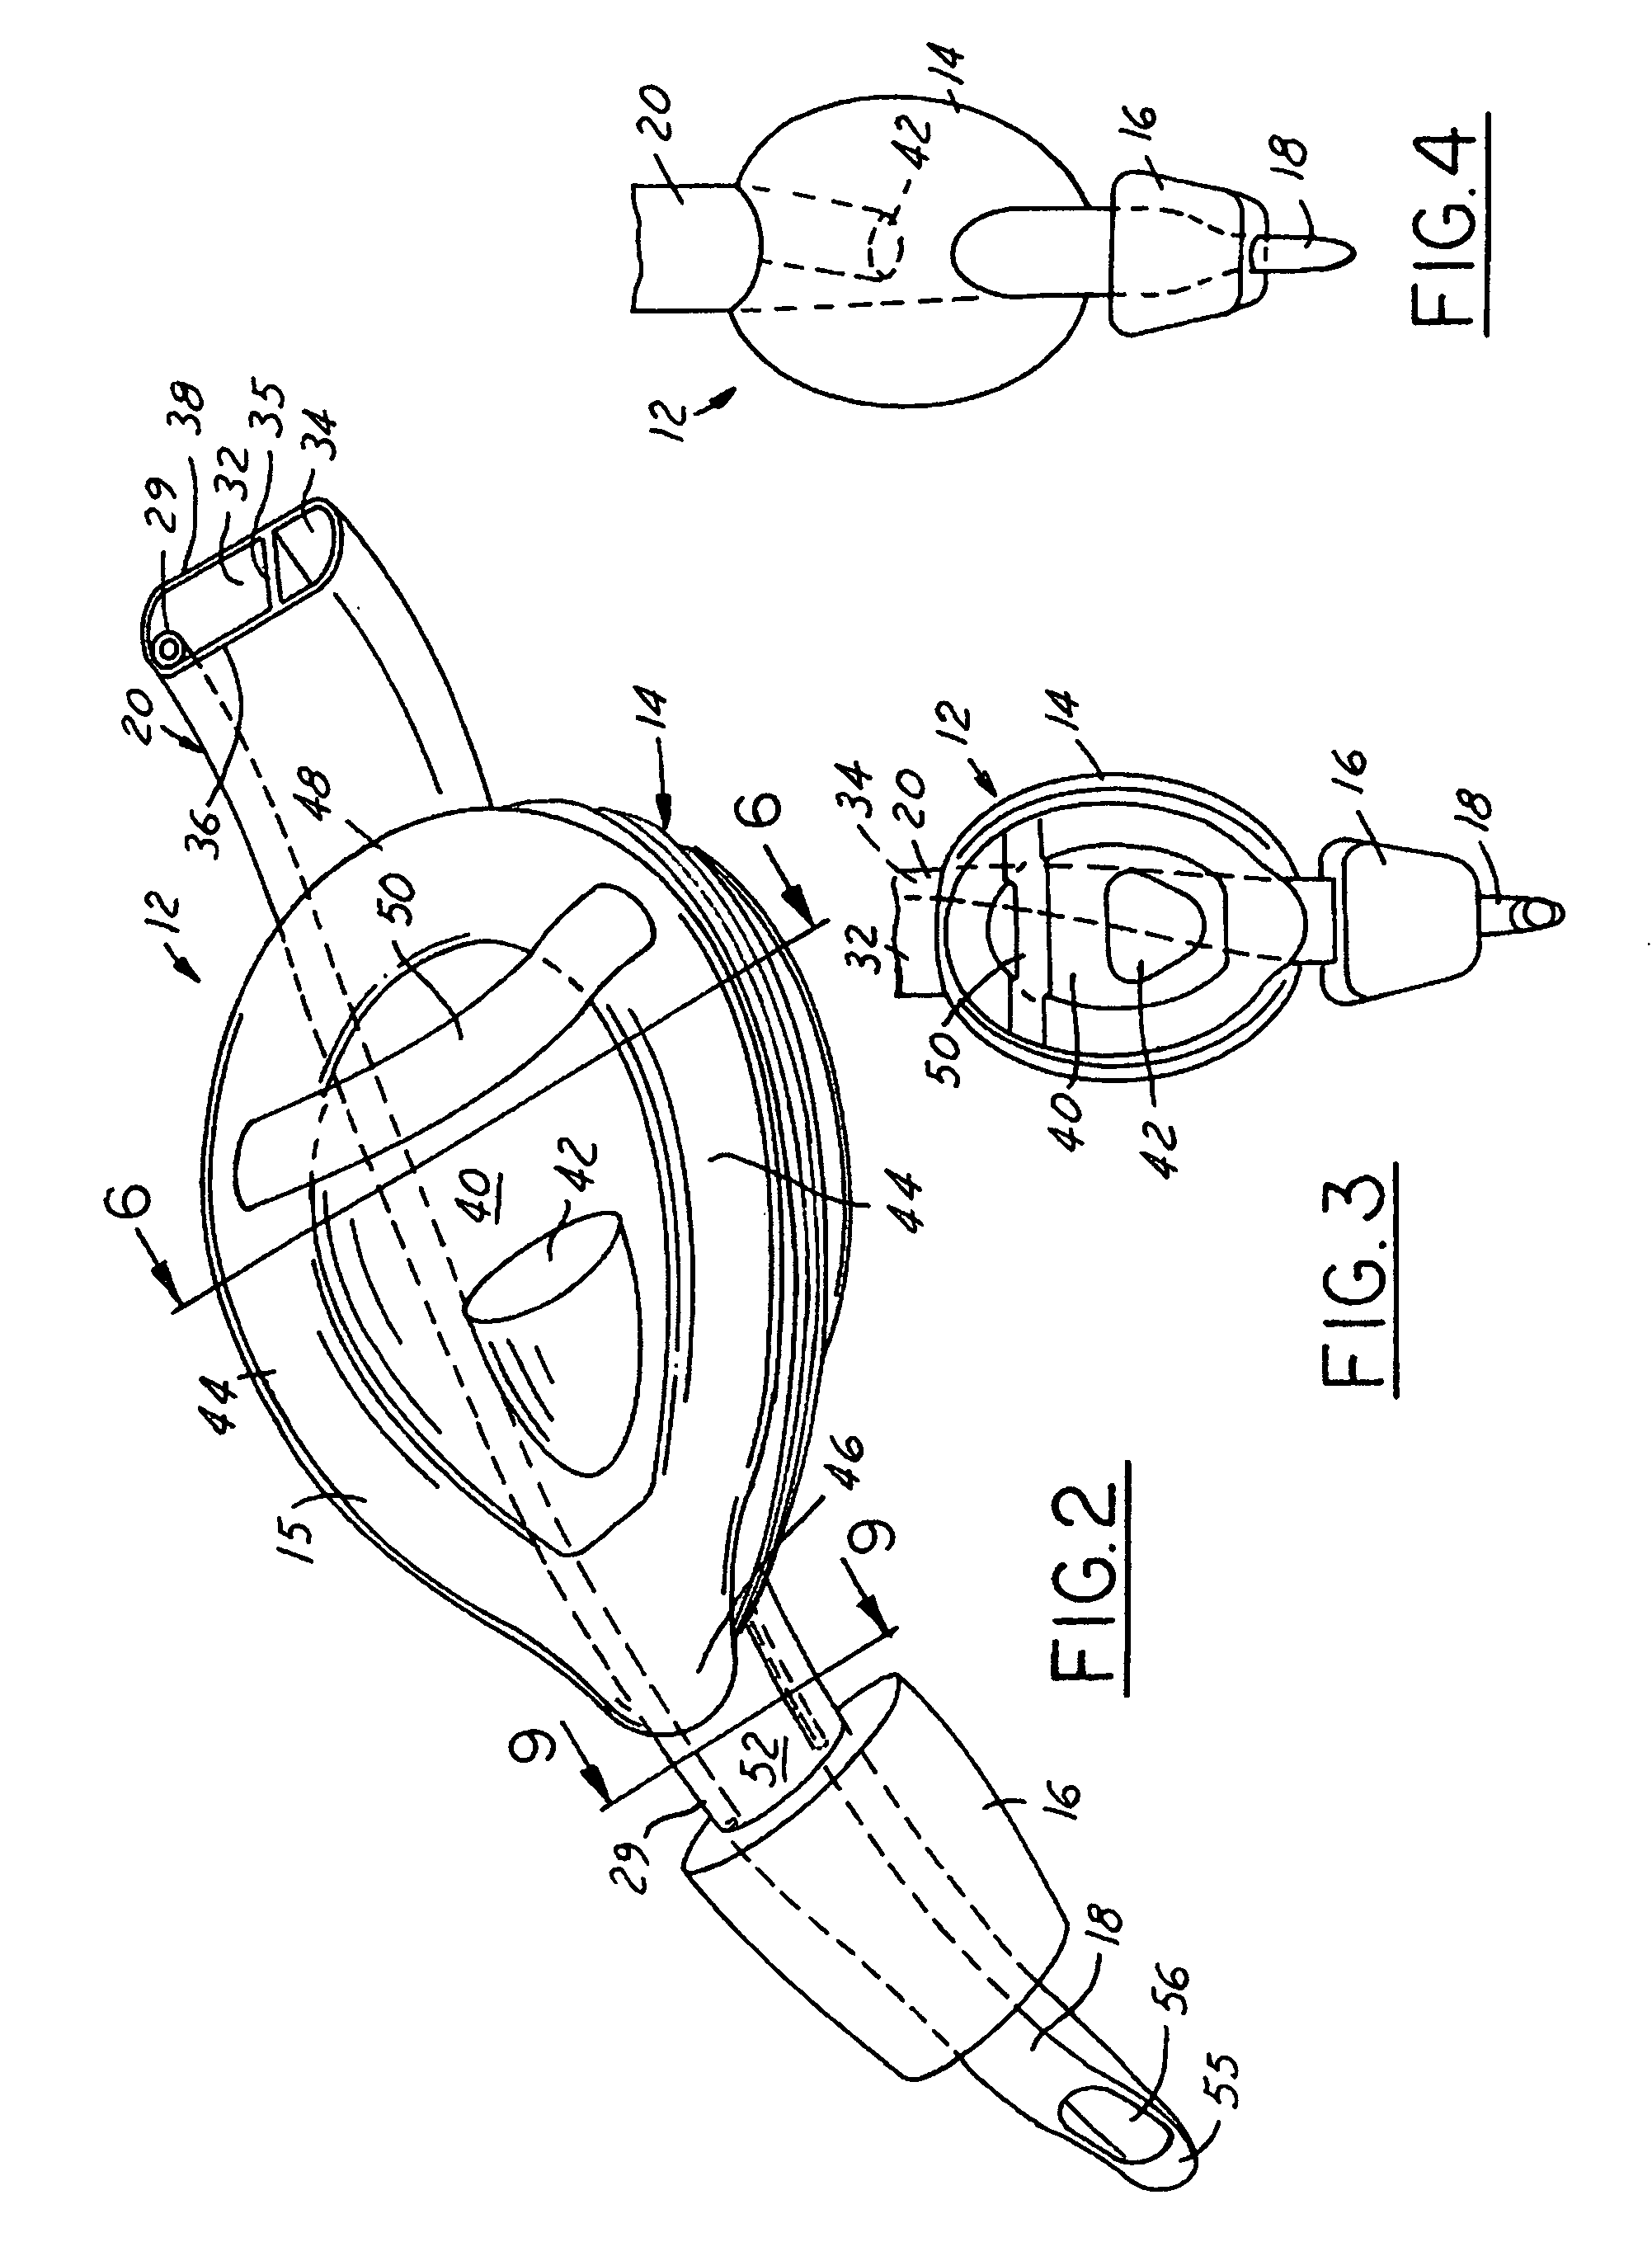 Combination artificial airway device and esophageal obturator